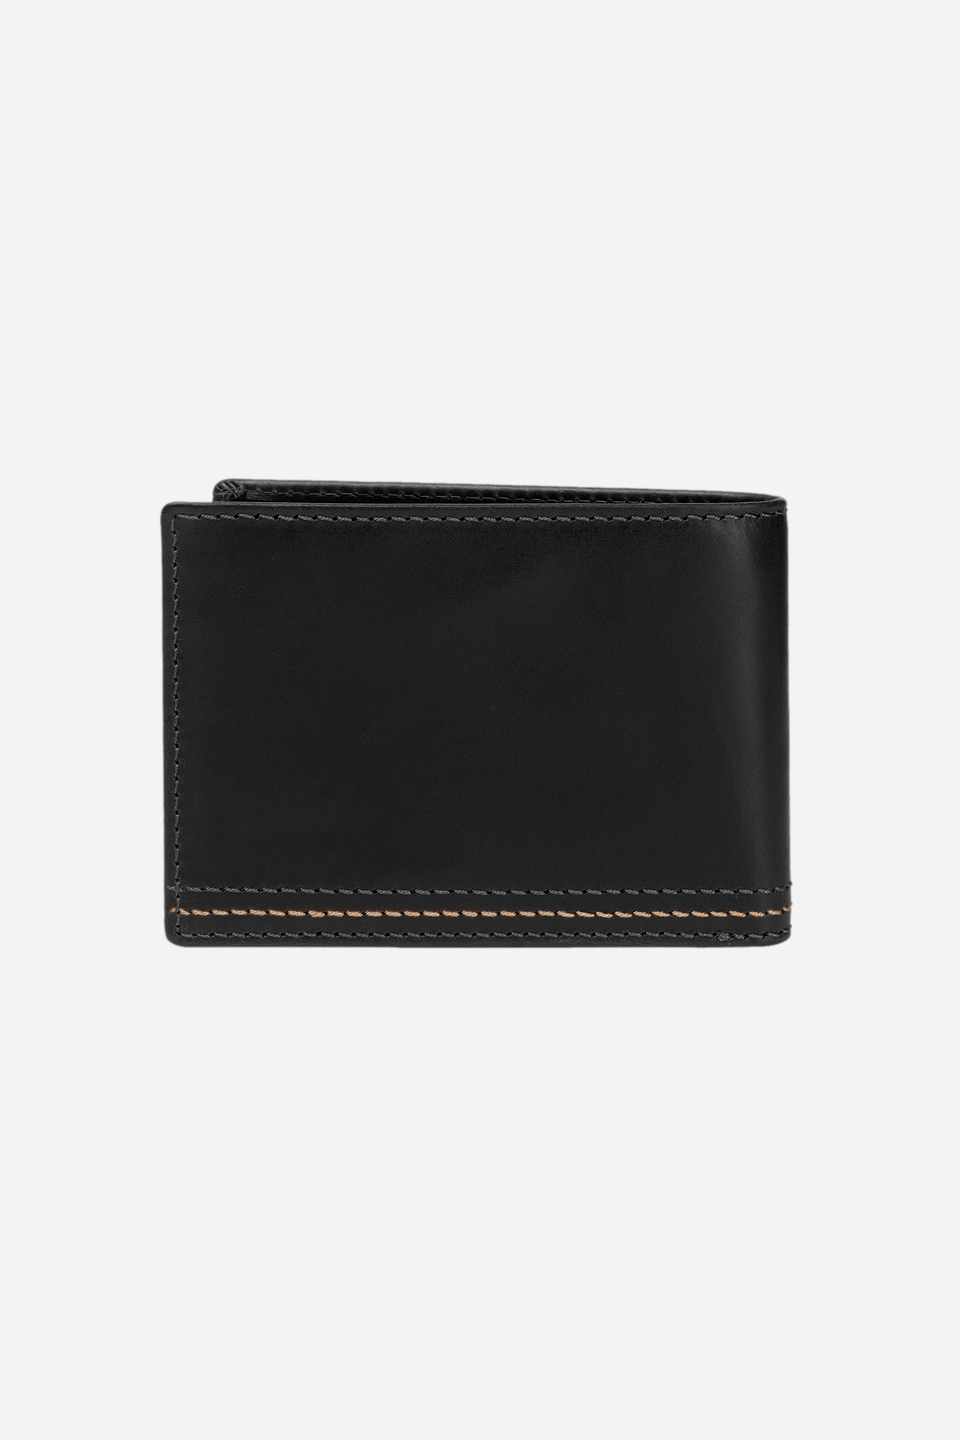 Men's leather wallet with coin purse - Axel | La Martina - Official Online Shop